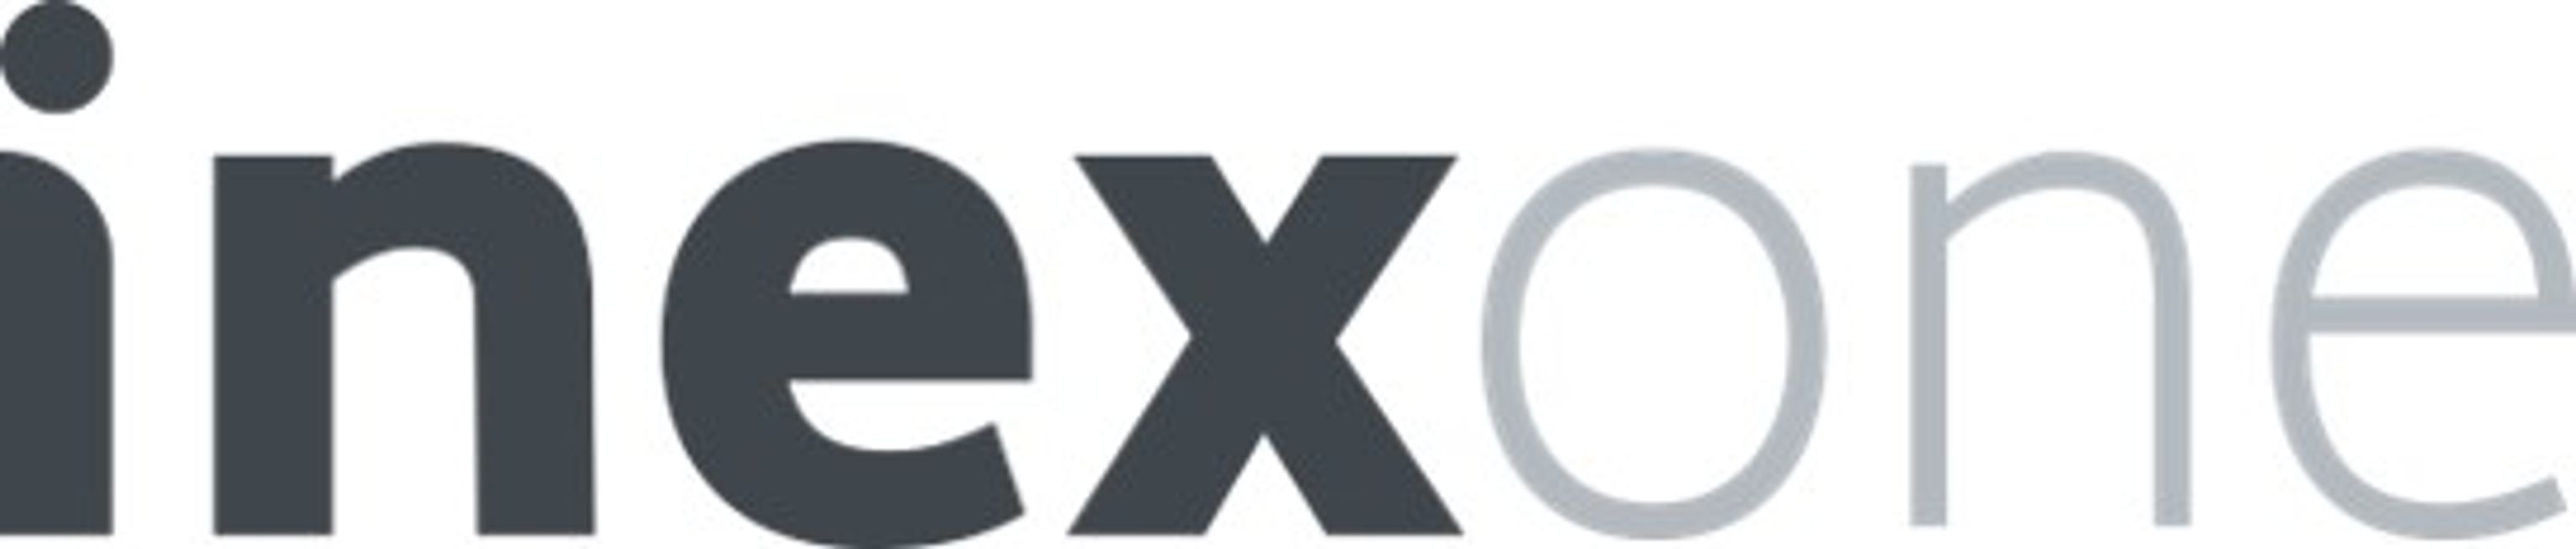 Inex One software tools